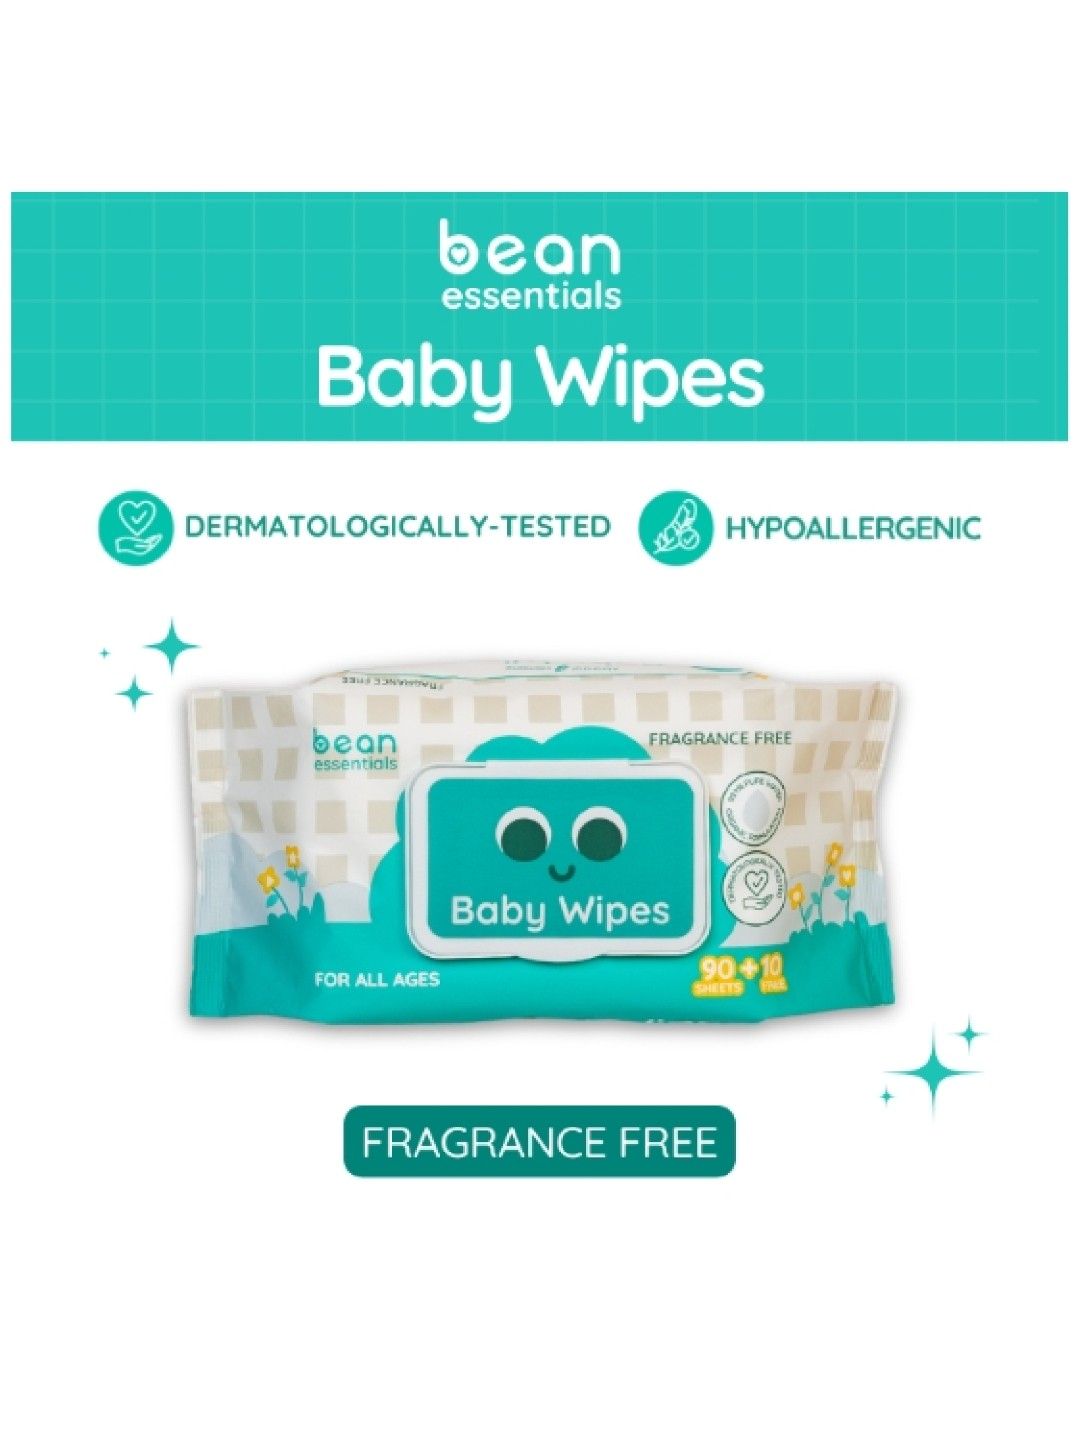 bean essentials Baby Wipes Fragrance Free 100 sheets (No Color- Image 1)